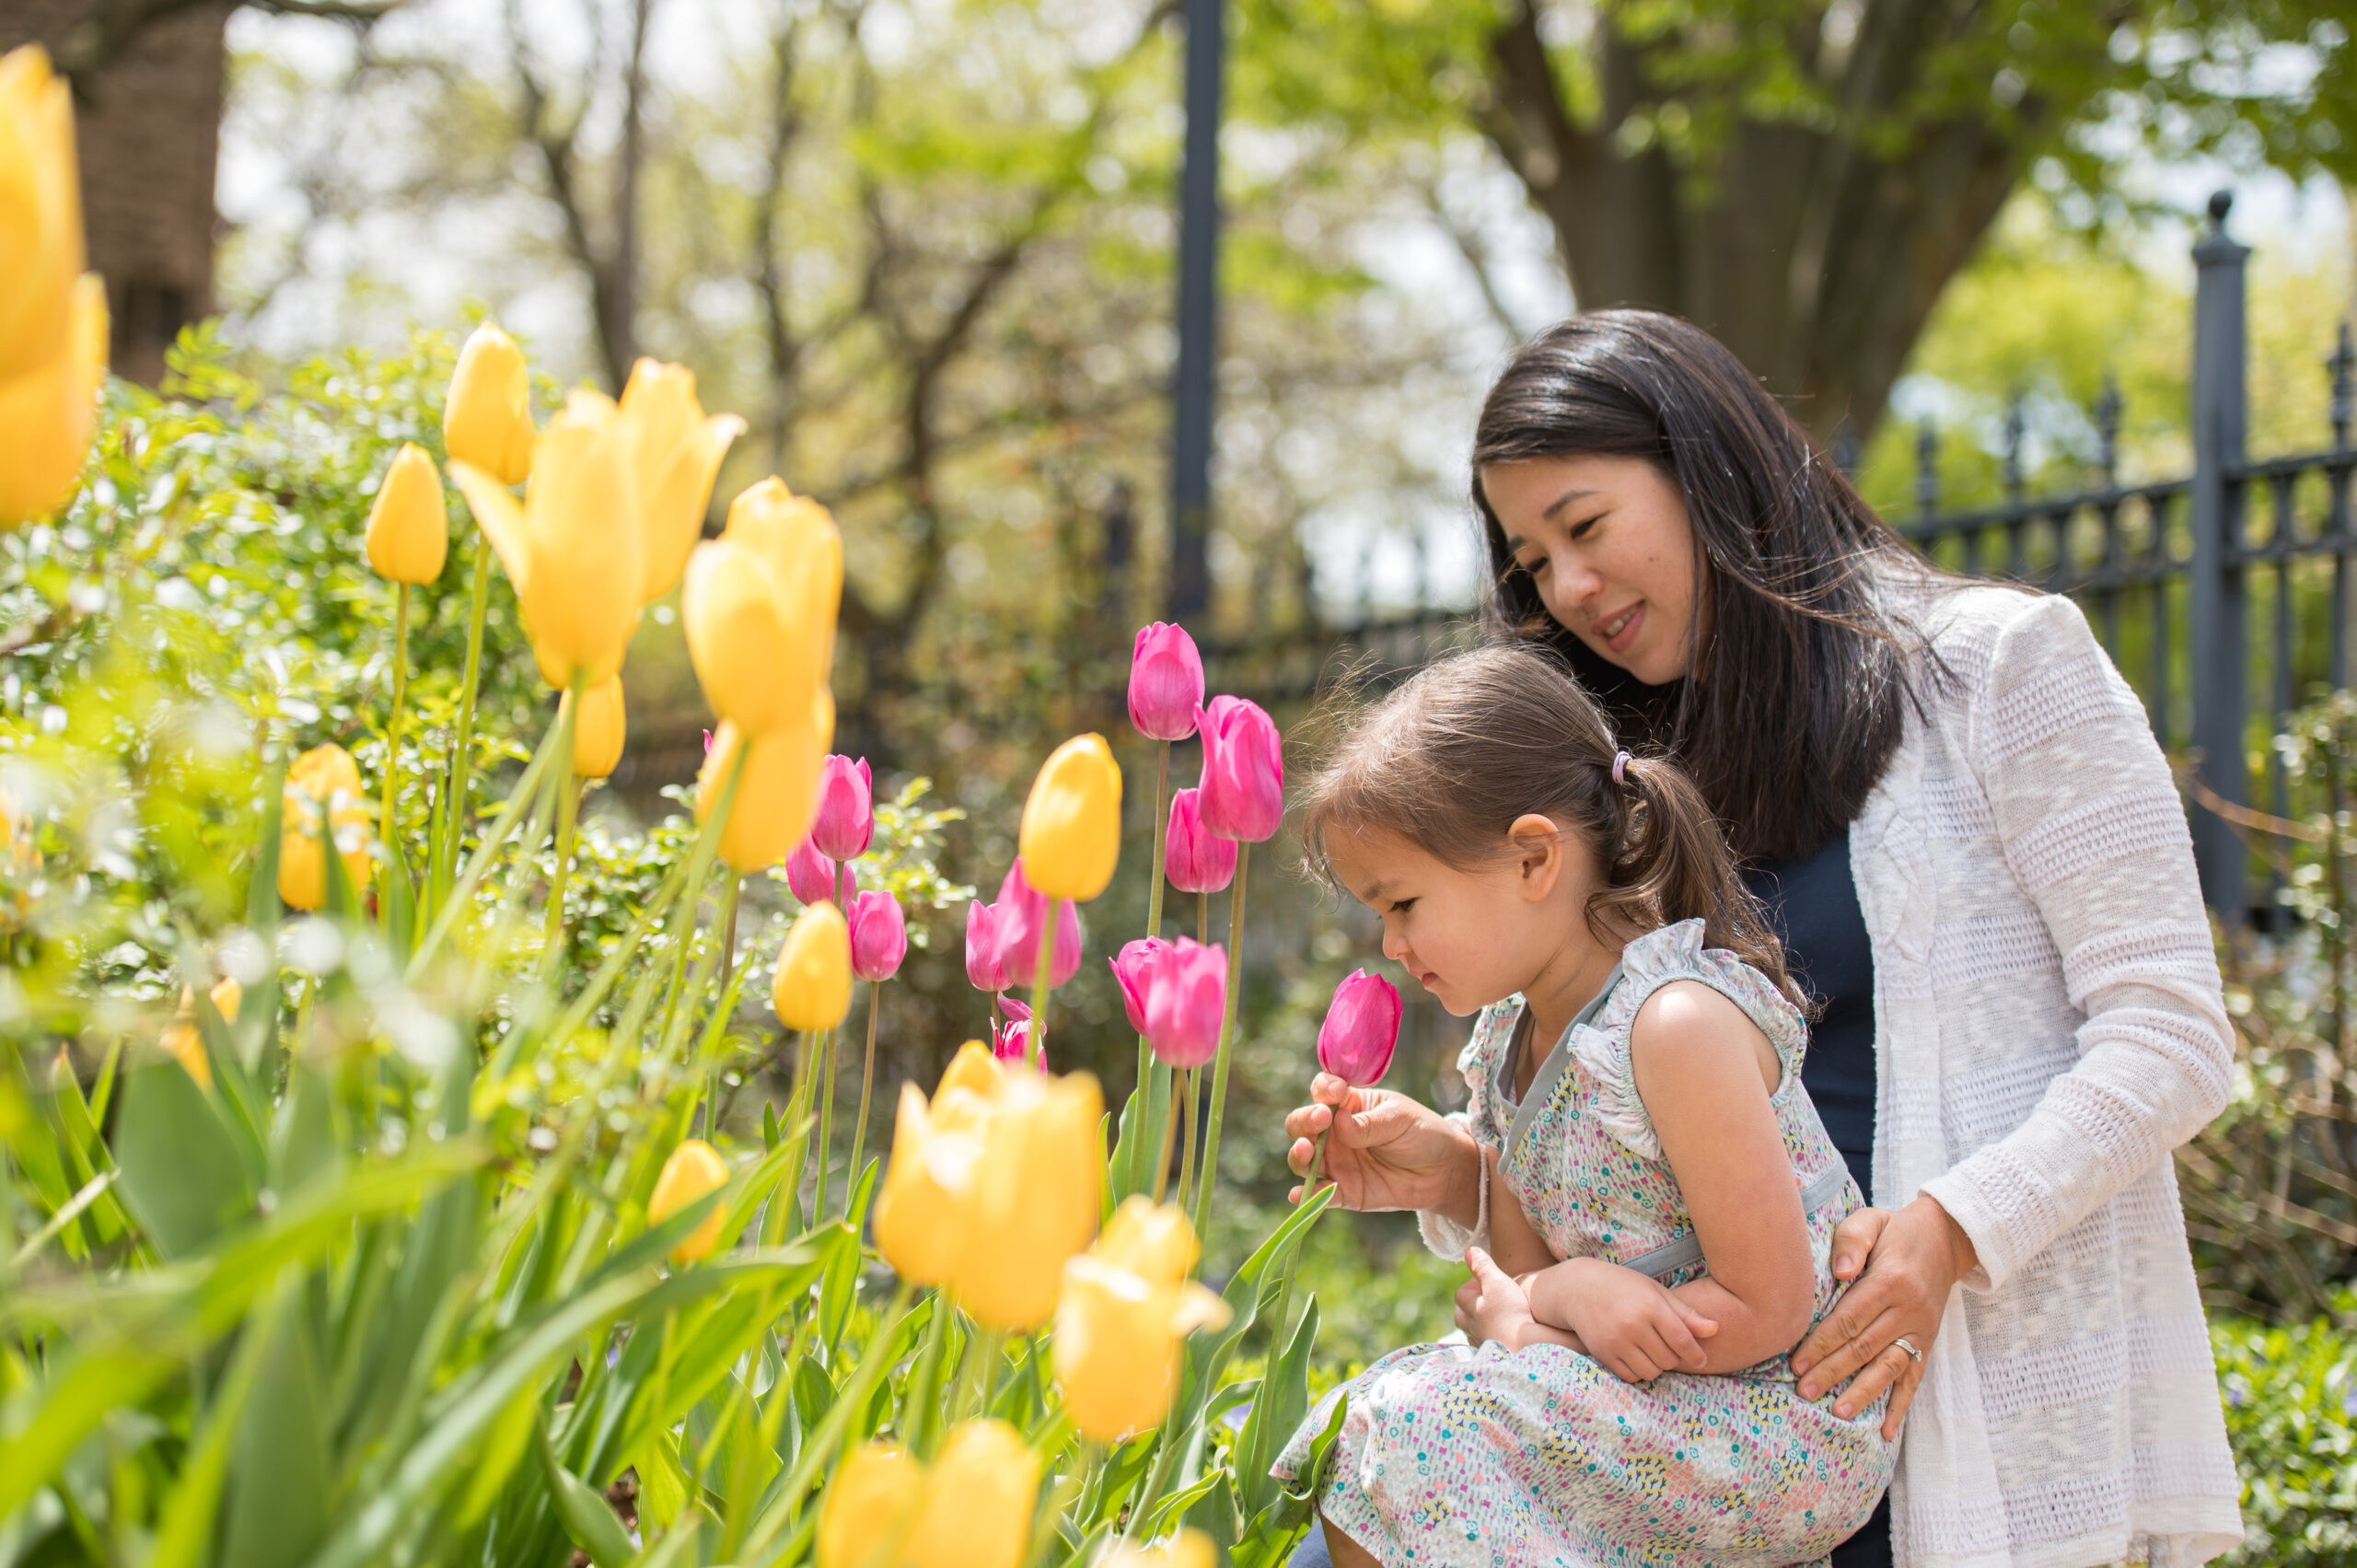 A mother and daughter smelling tulips together.